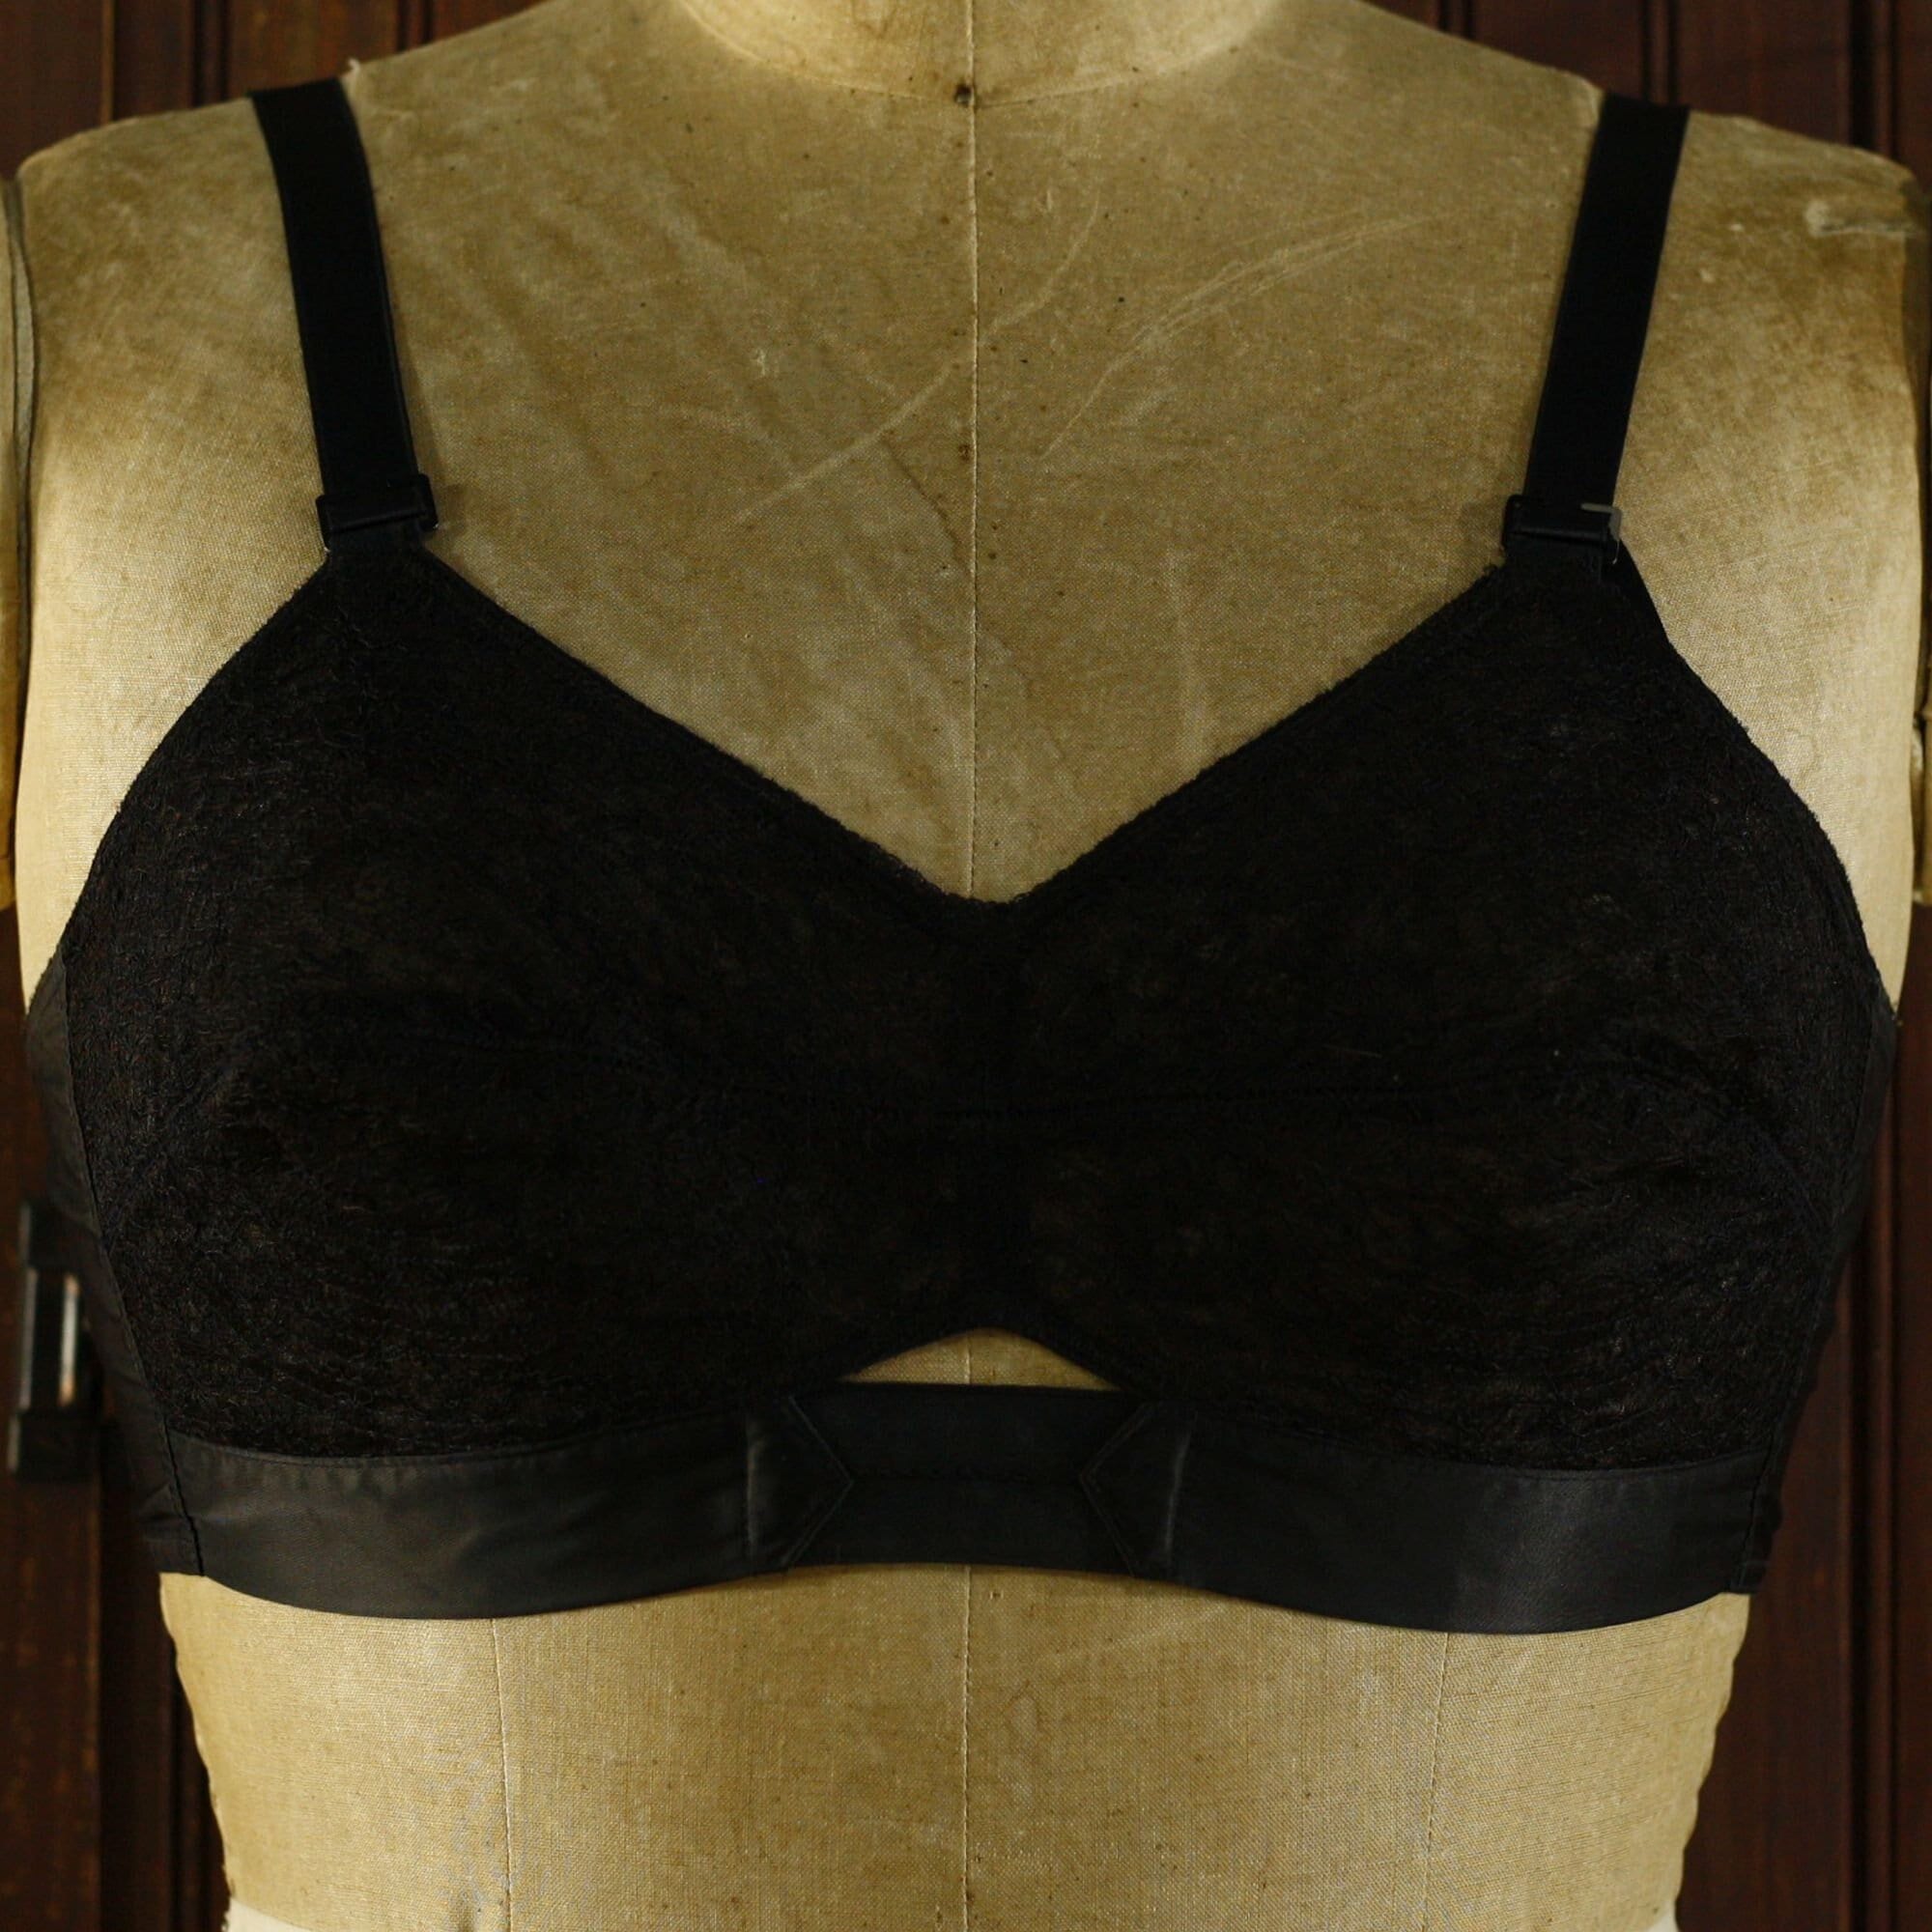 1970 women's Maidenform bra girl needs a lift once in while